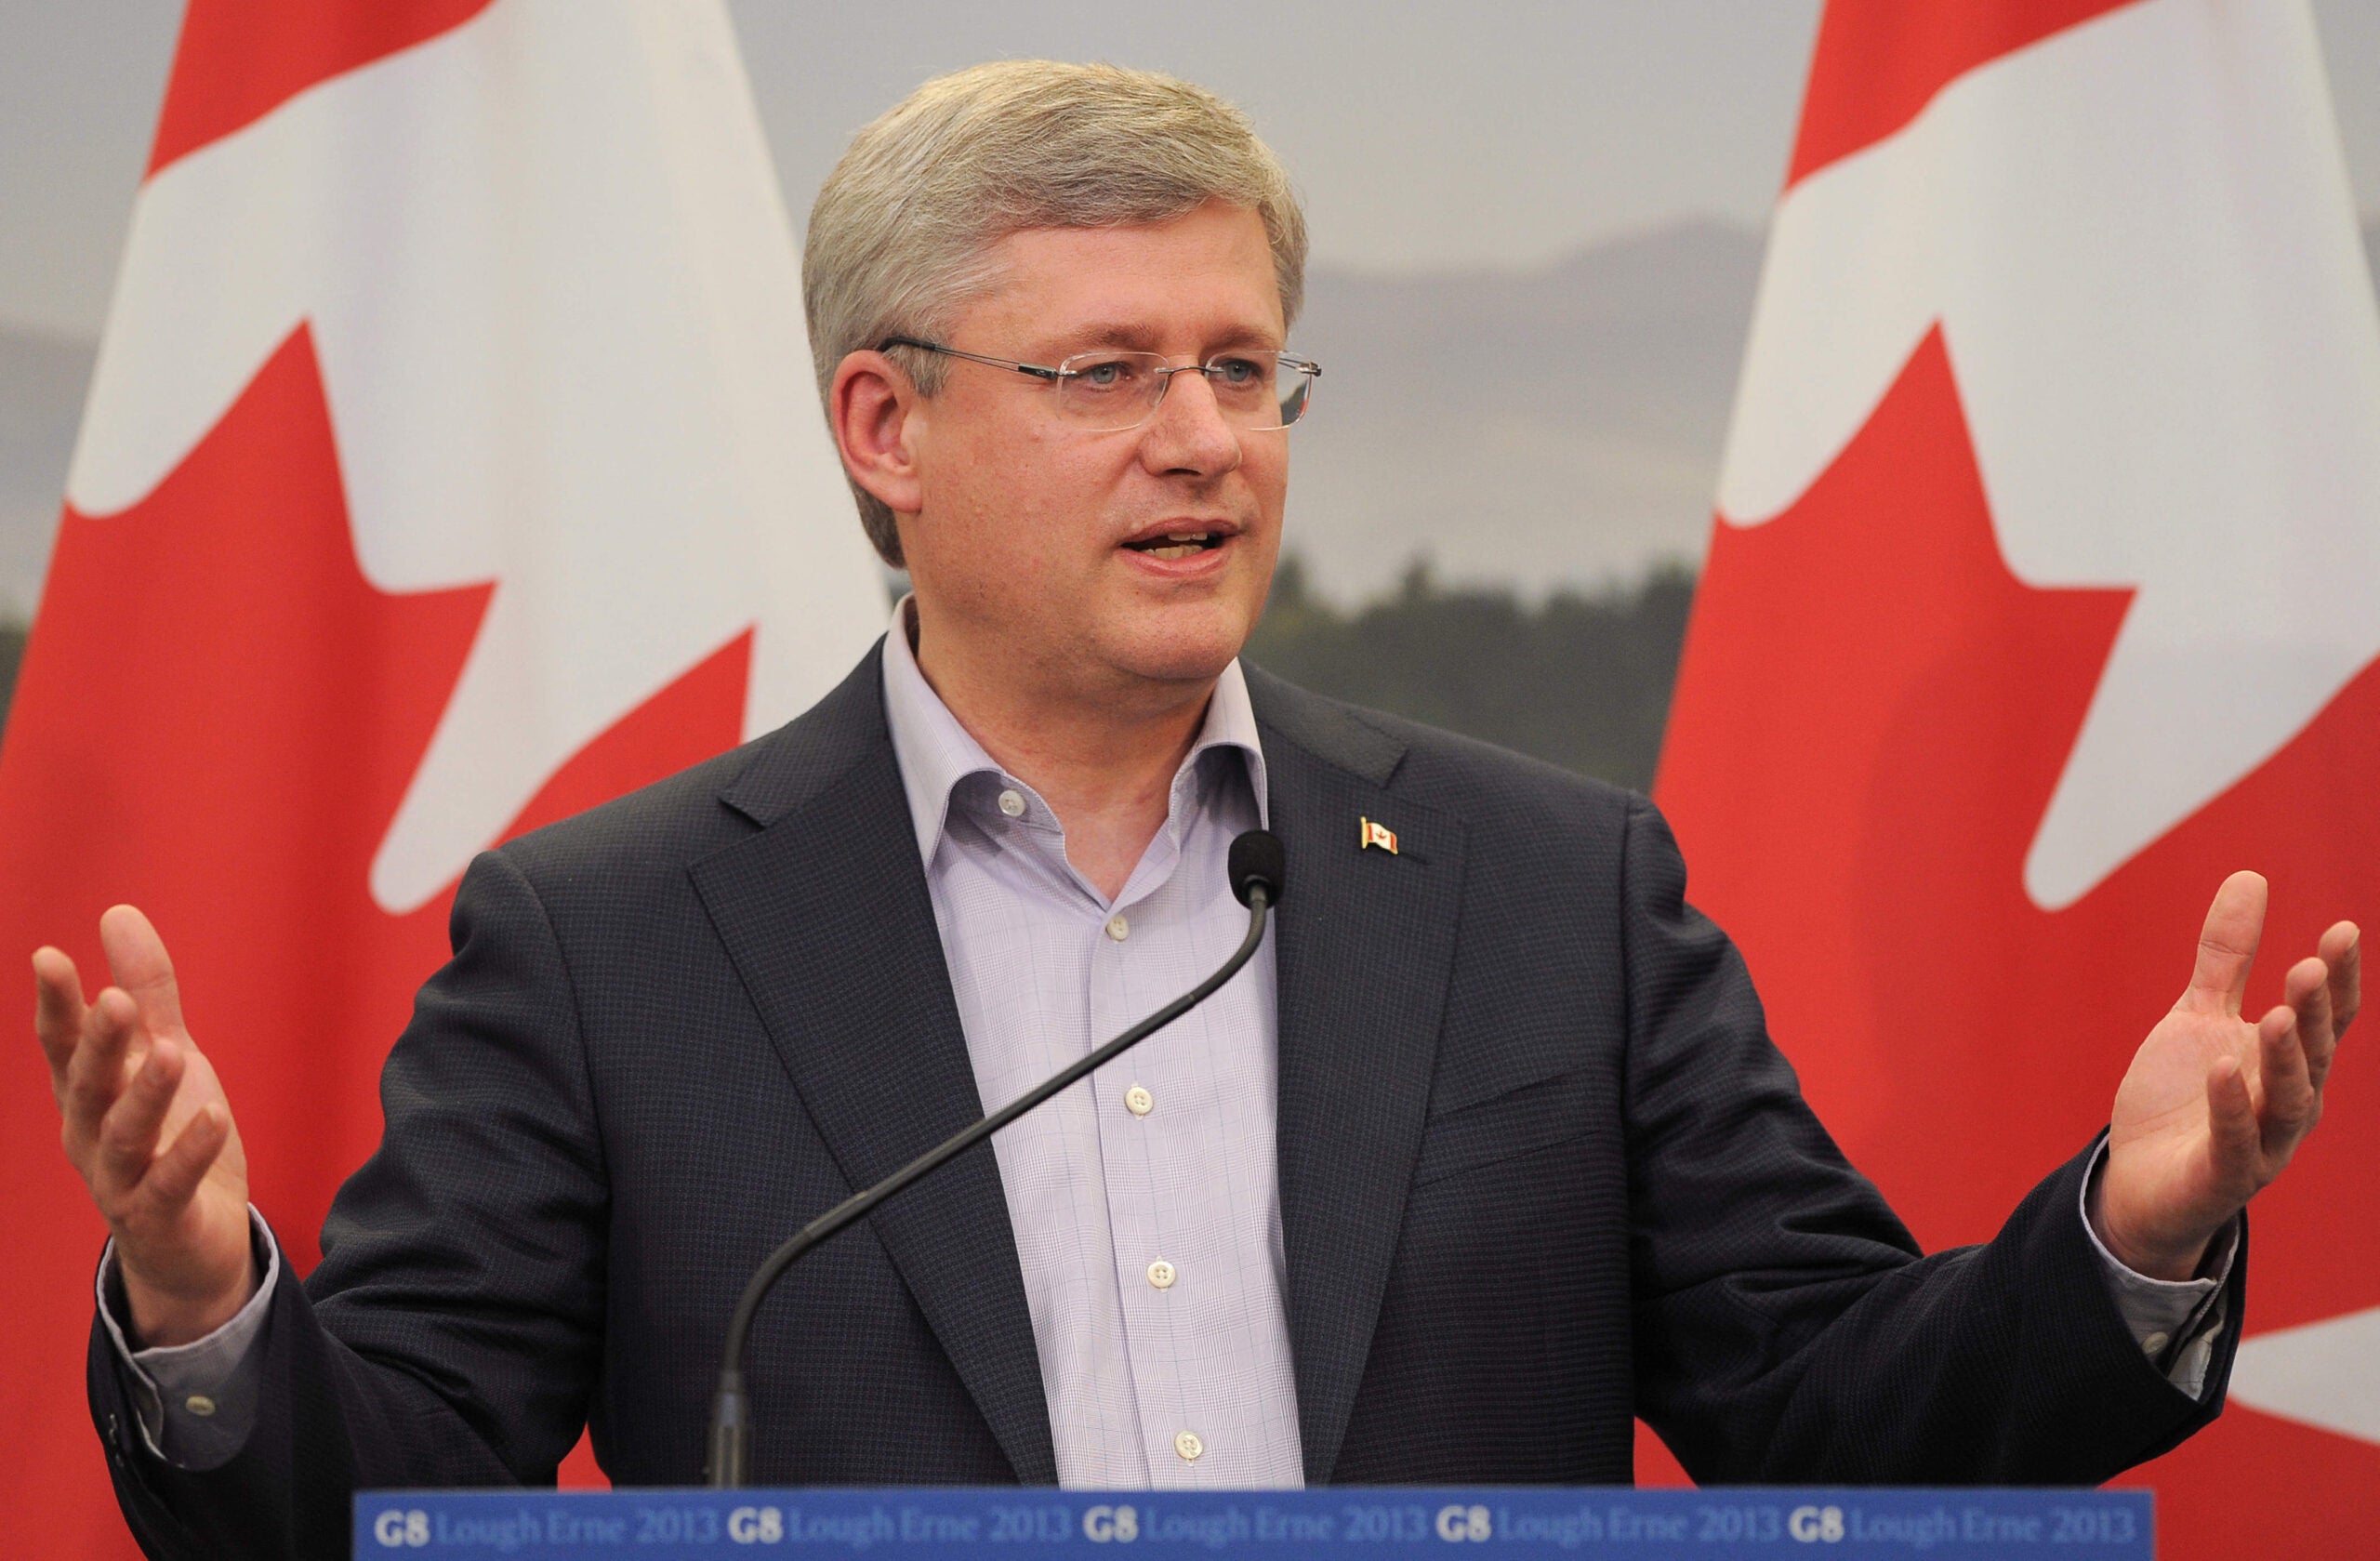 How Stephen Harper is using paranoia to win in 2015